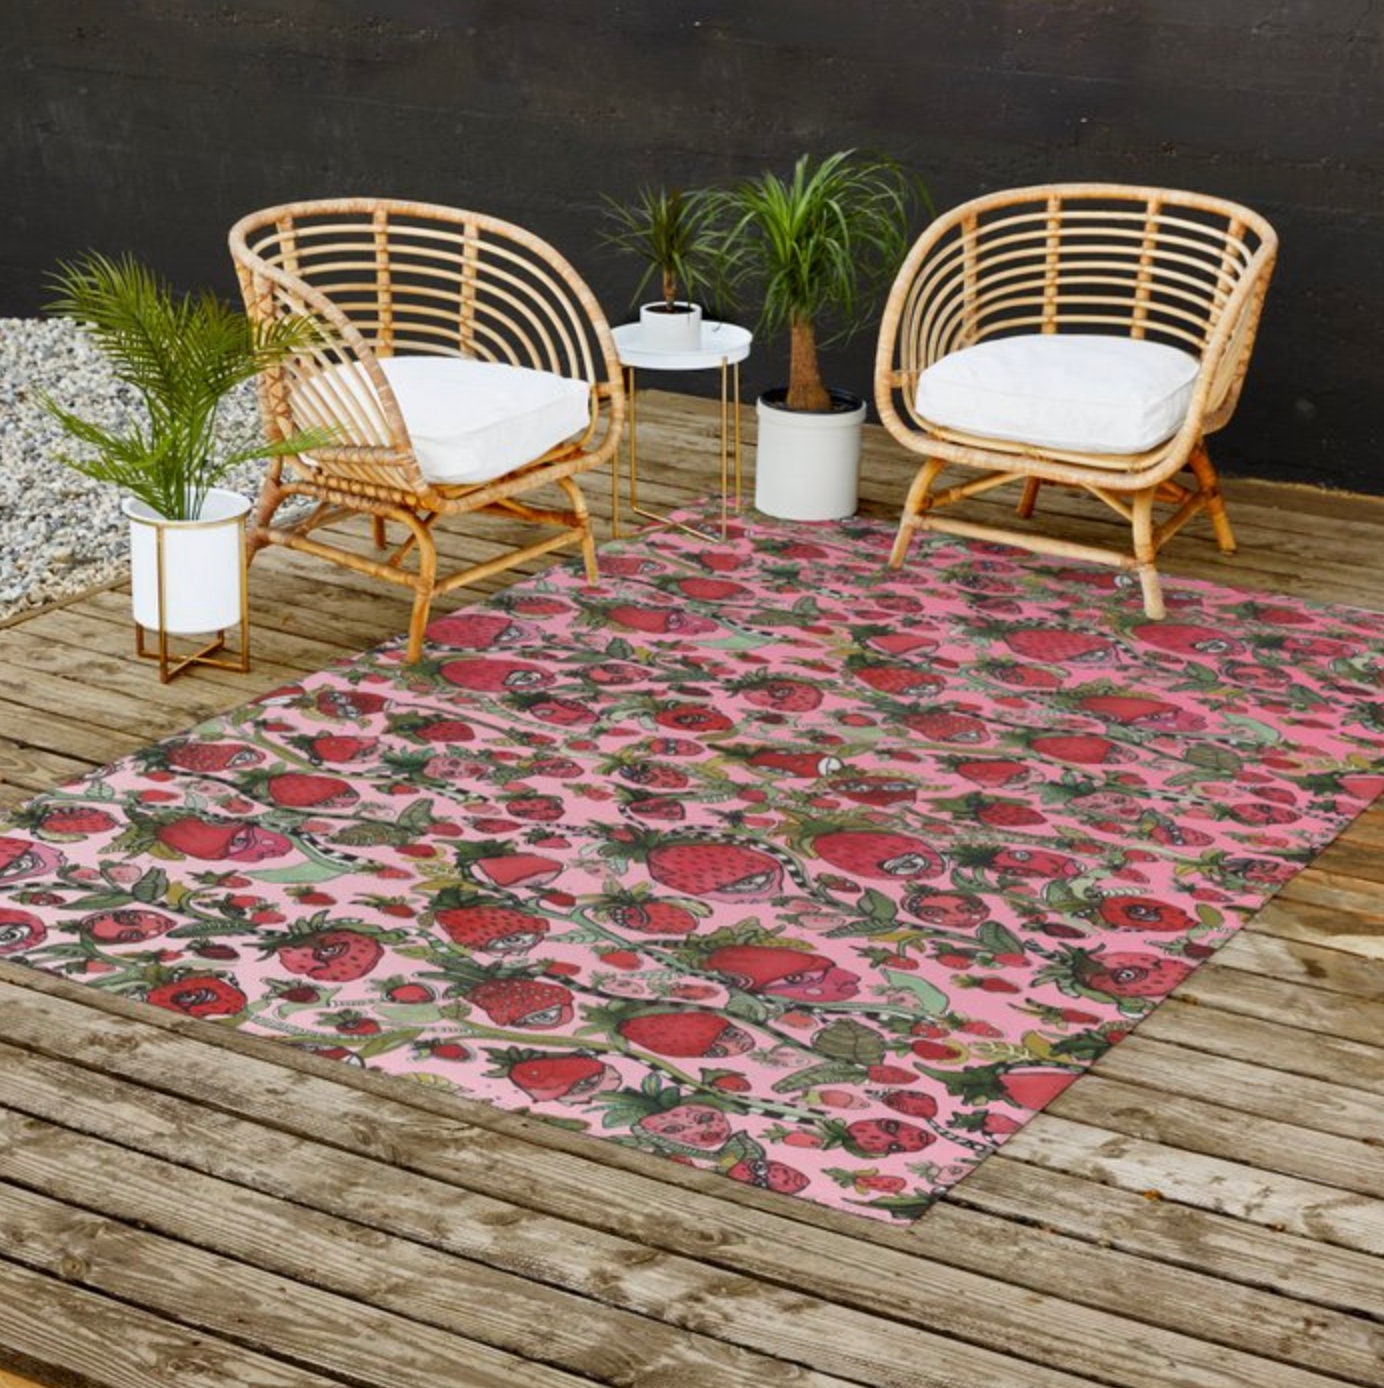  Forest Rug 3x4 Area Rug Landscape Rugs for Entryway